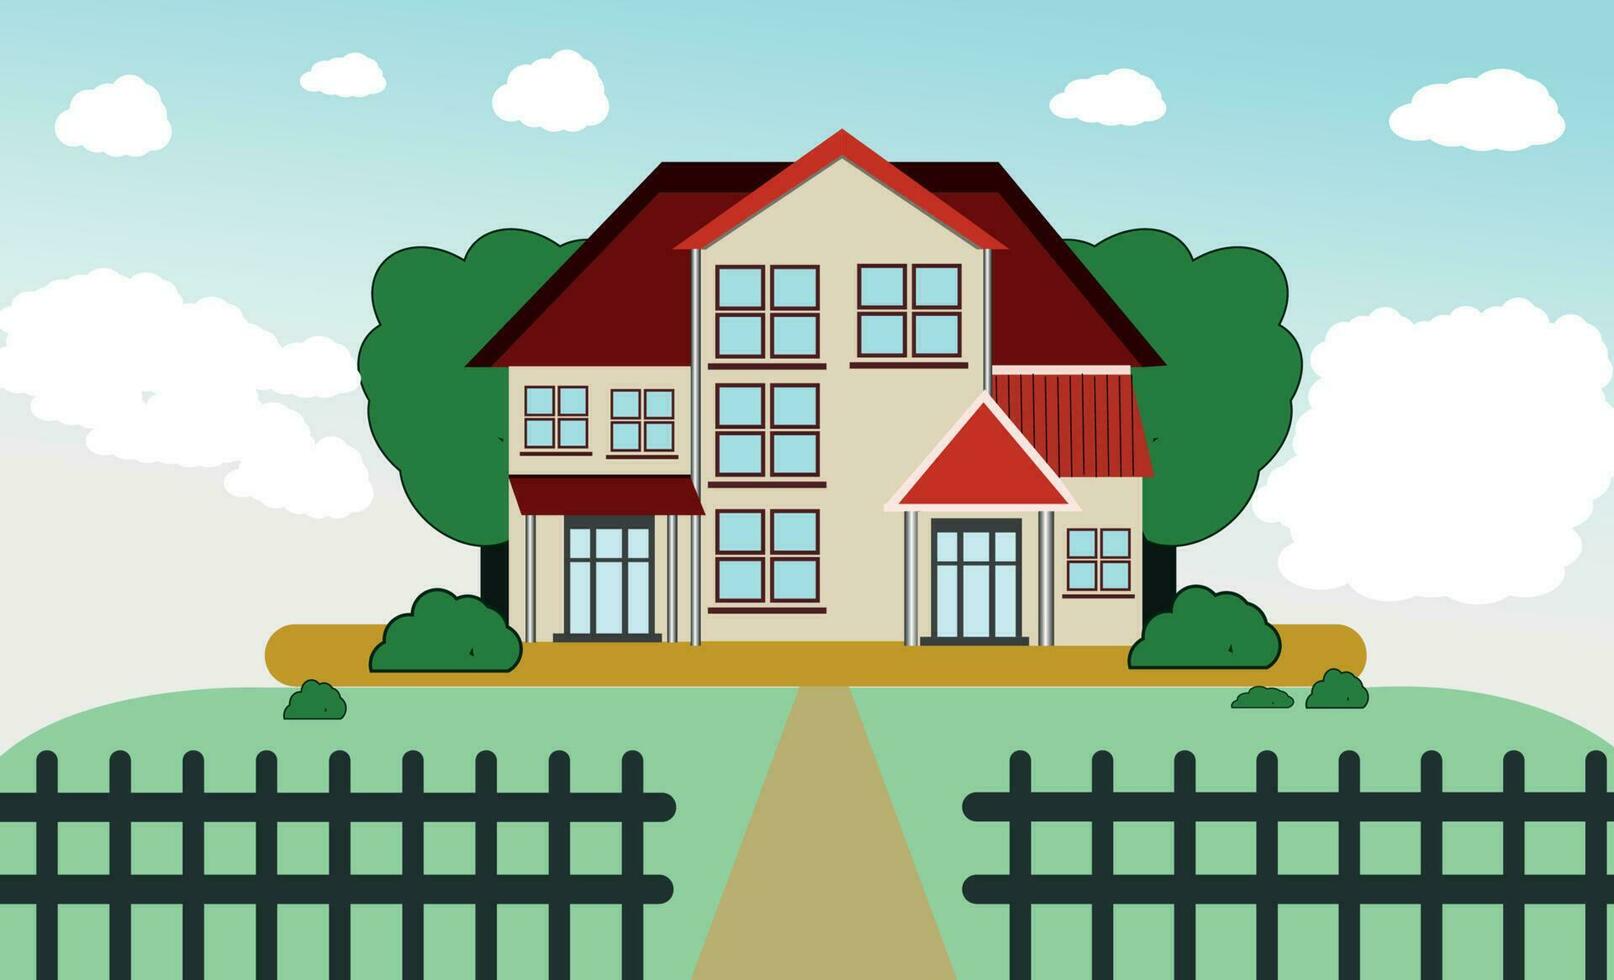 A house along the road. Part of the rural landscape. Vector illustration in flat style. green sky